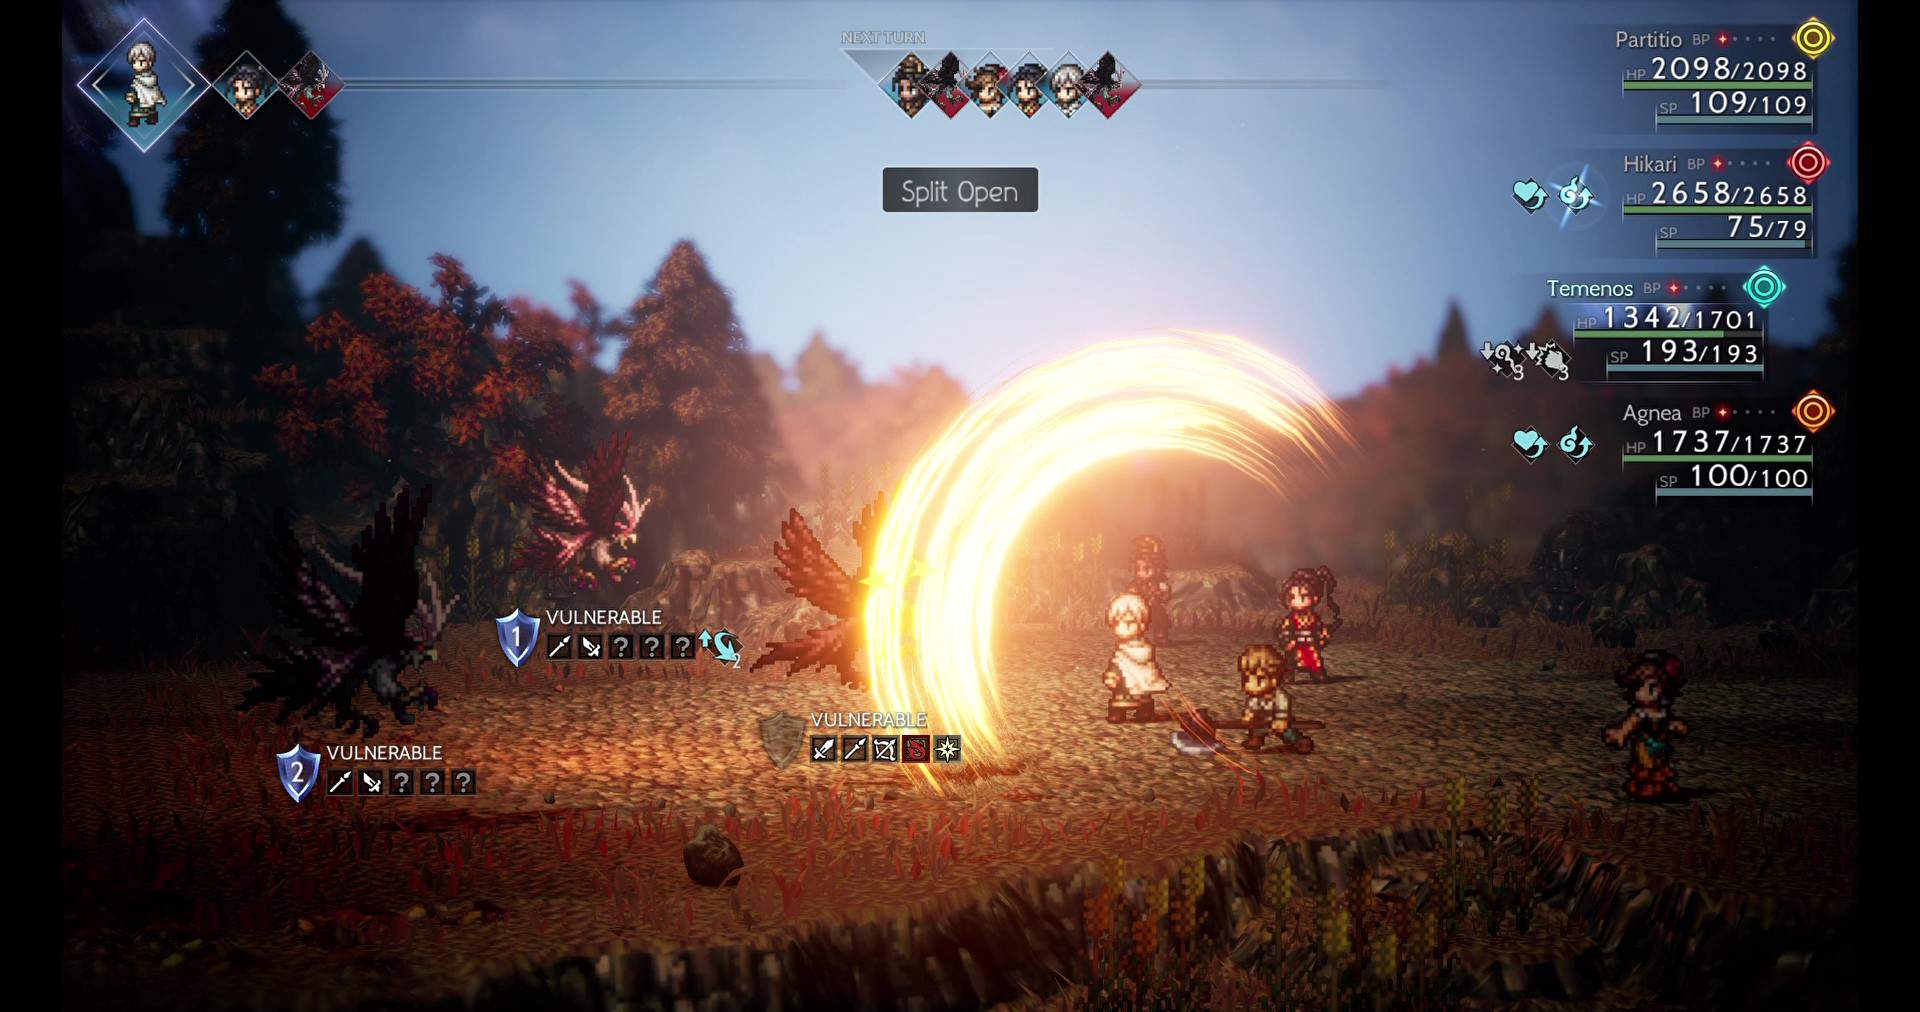 OCTOPATH TRAVELER II Review - Console Game Stuff